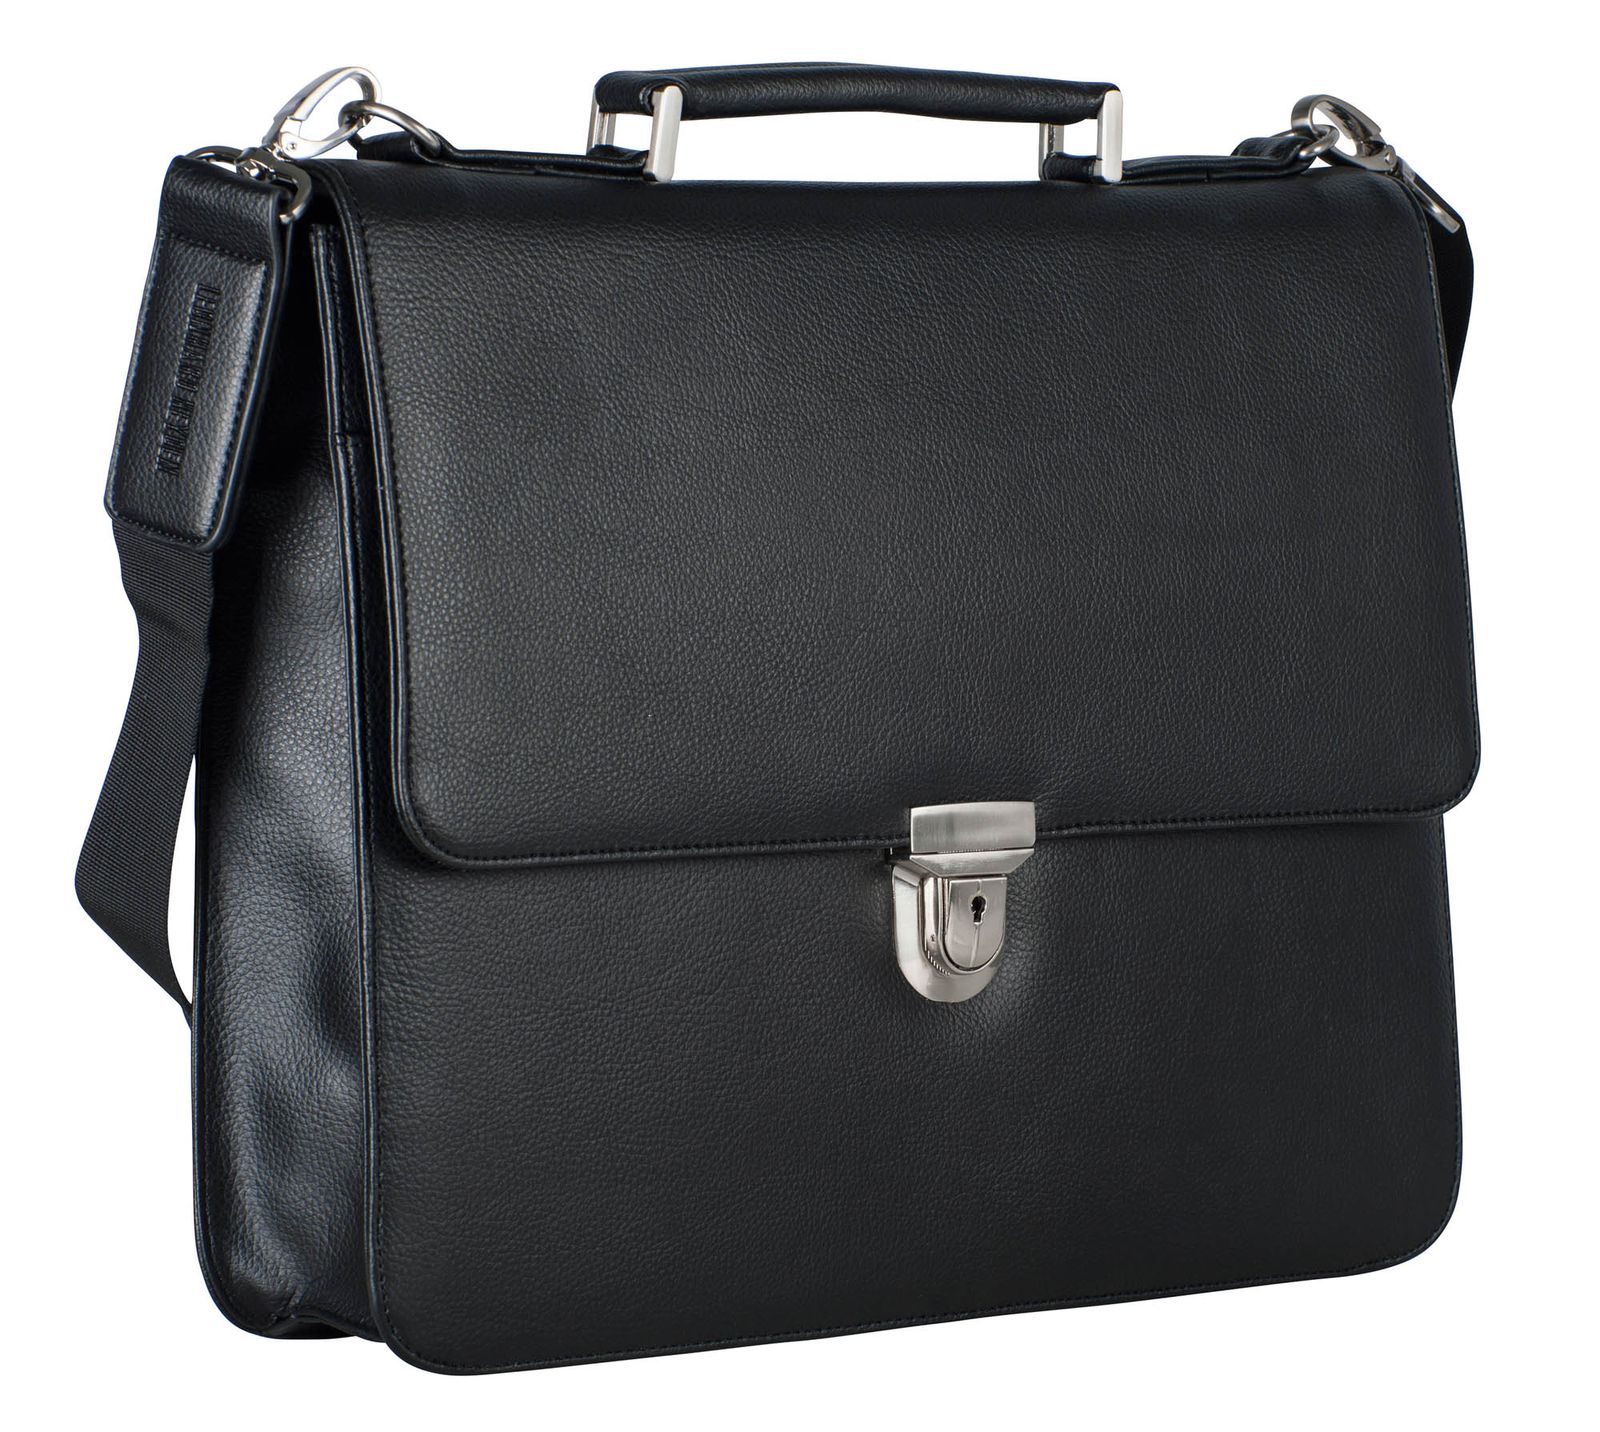 LEONHARD HEYDEN Briefcase 1 Compartment | Buy bags, purses ...